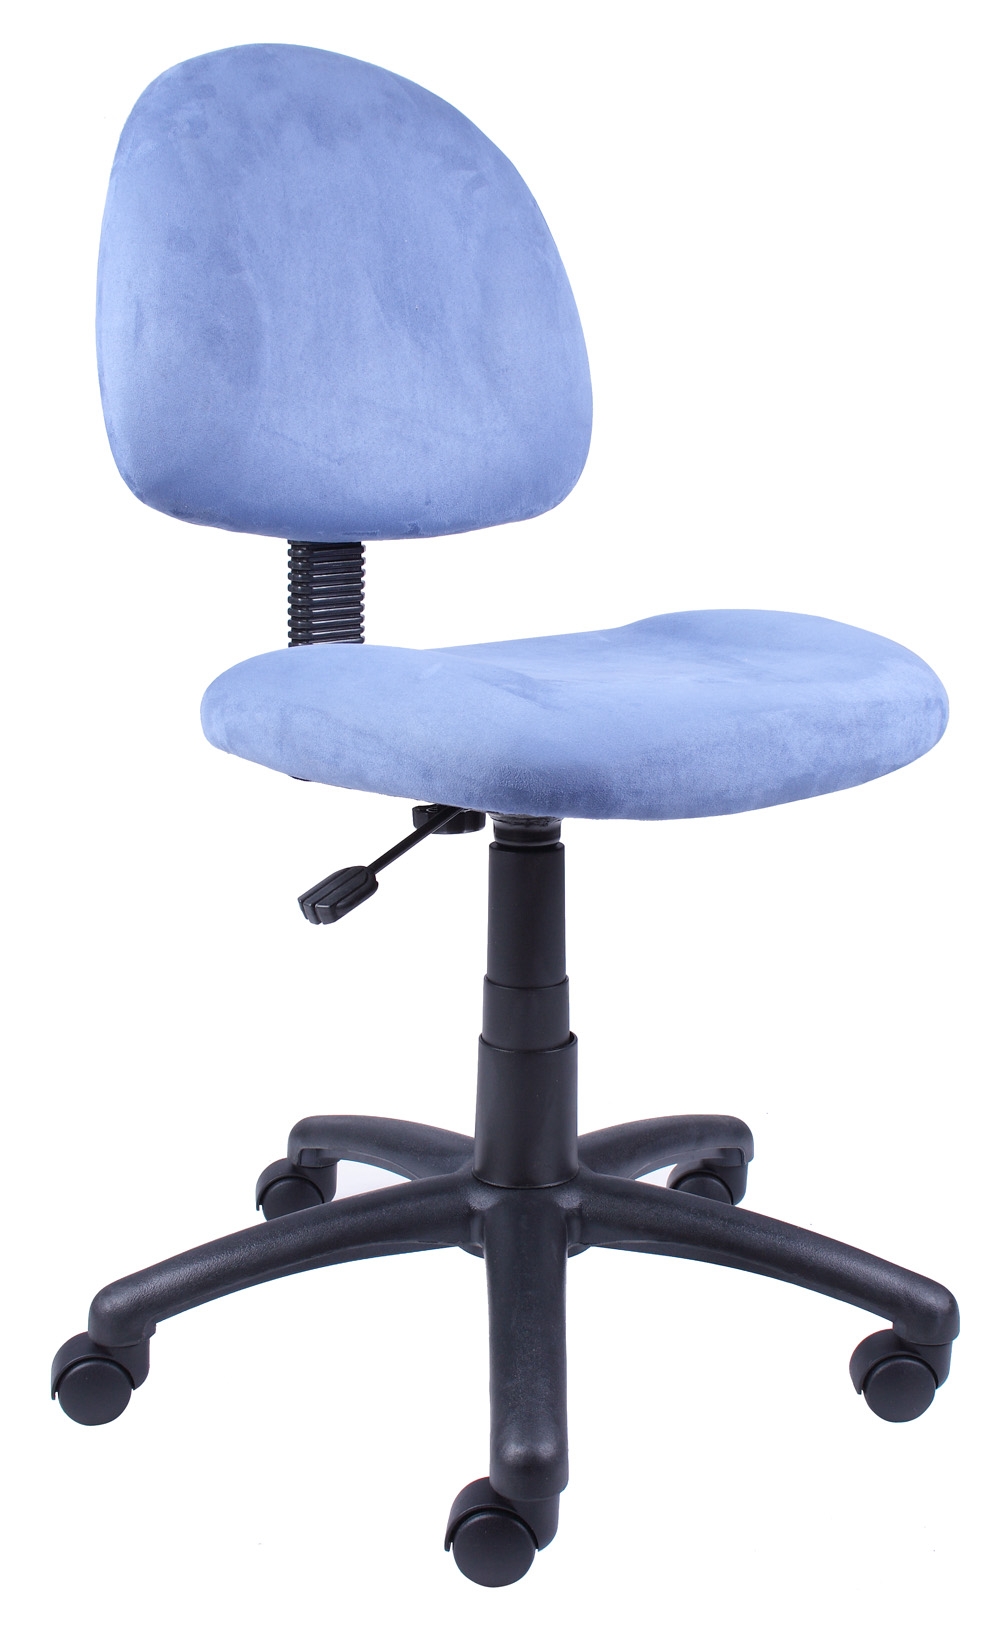 Boss Office Products B325-BE Perfect Posture Deluxe Modern Home Office Chair without Arms, Blue - image 1 of 6